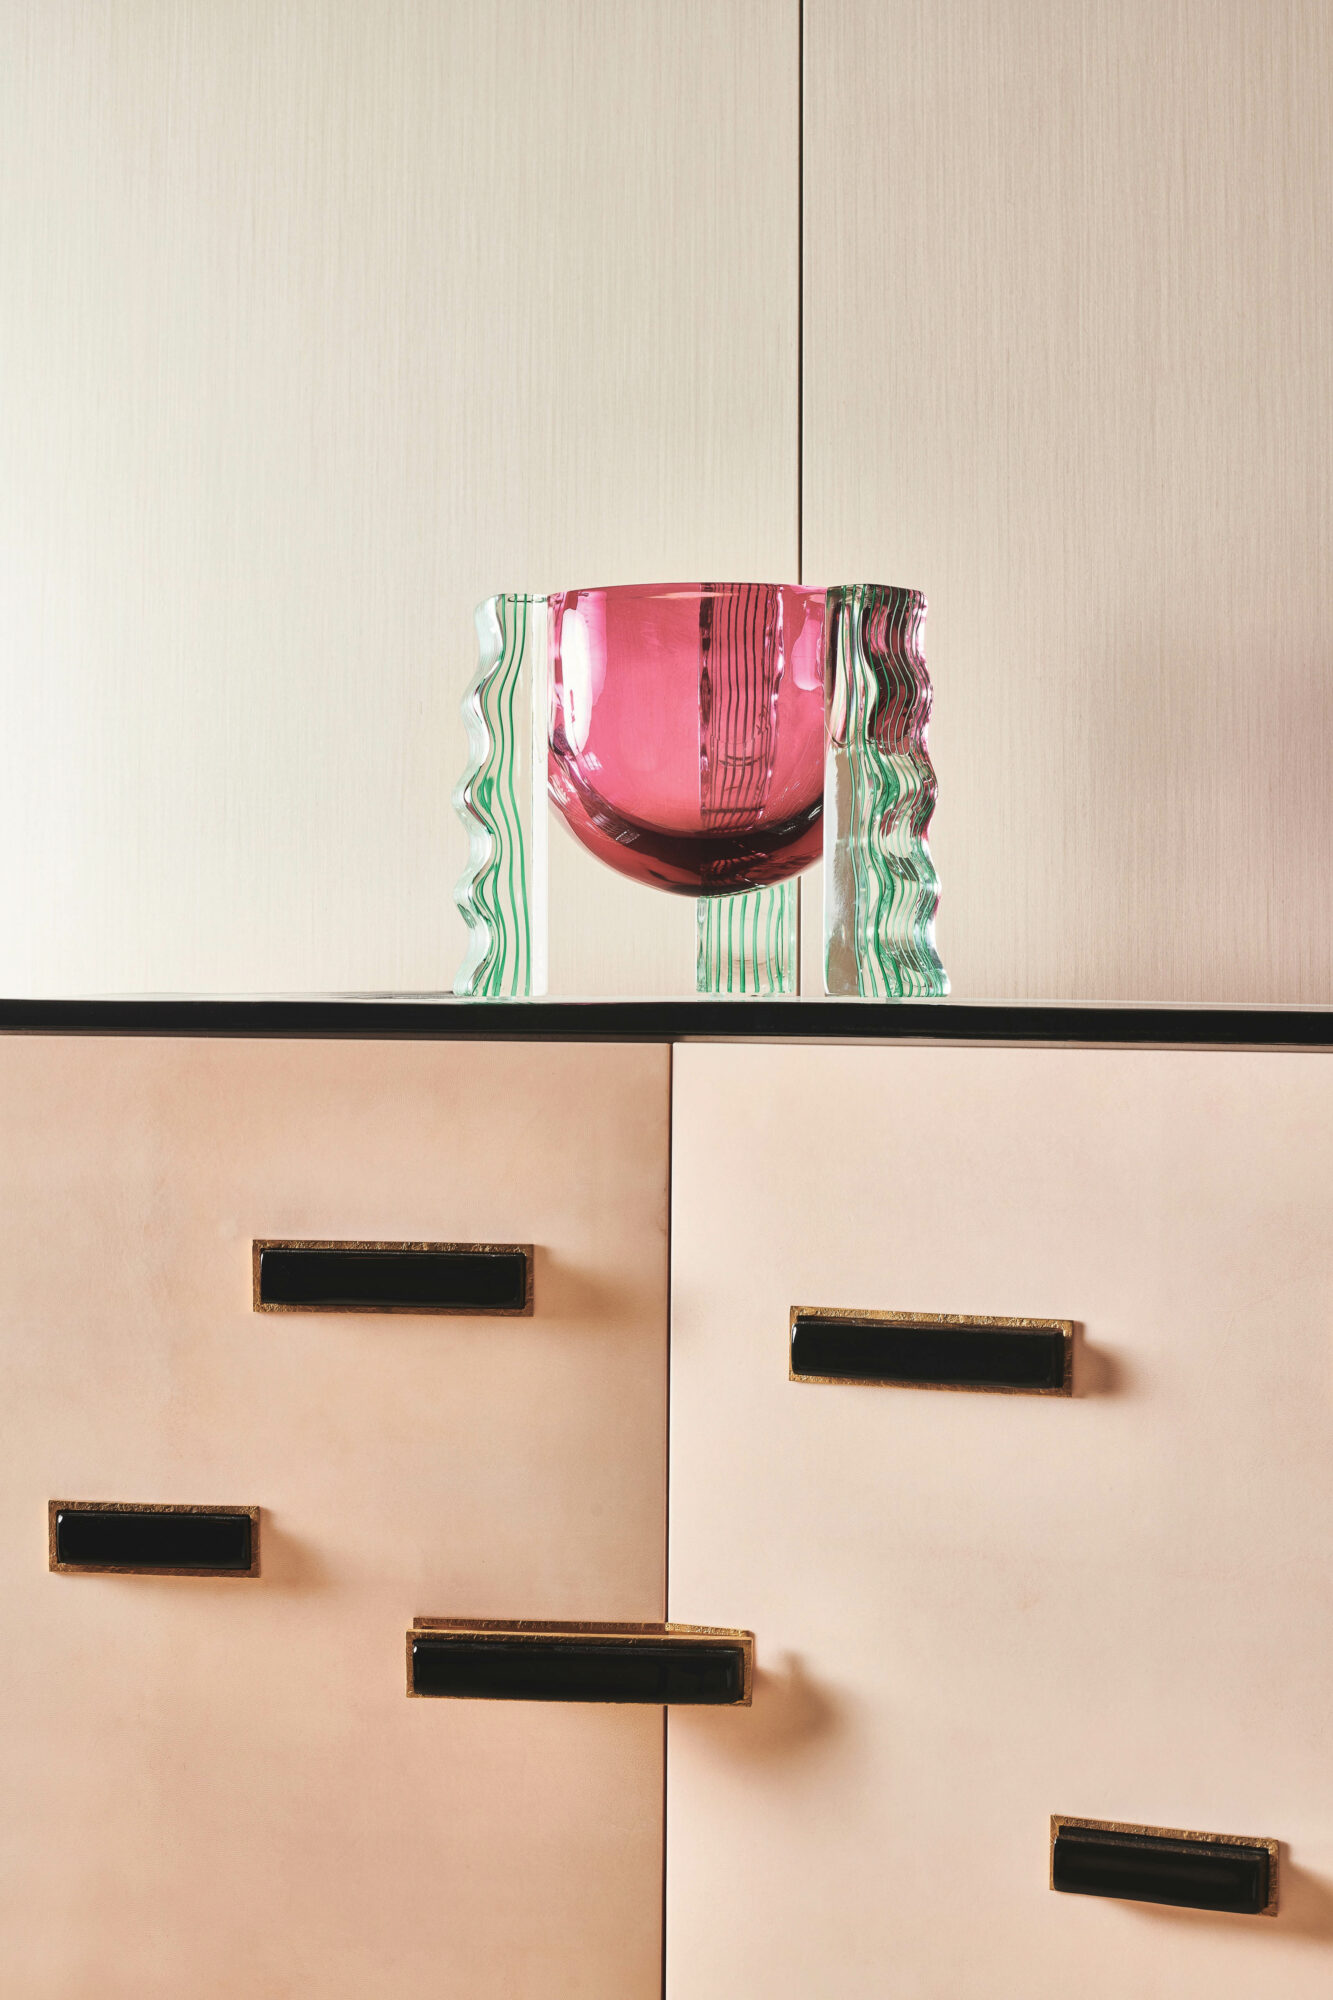 Abstract pink-and-green glass vase shown in Achille Salvagni Atelier, part of the New York art scene